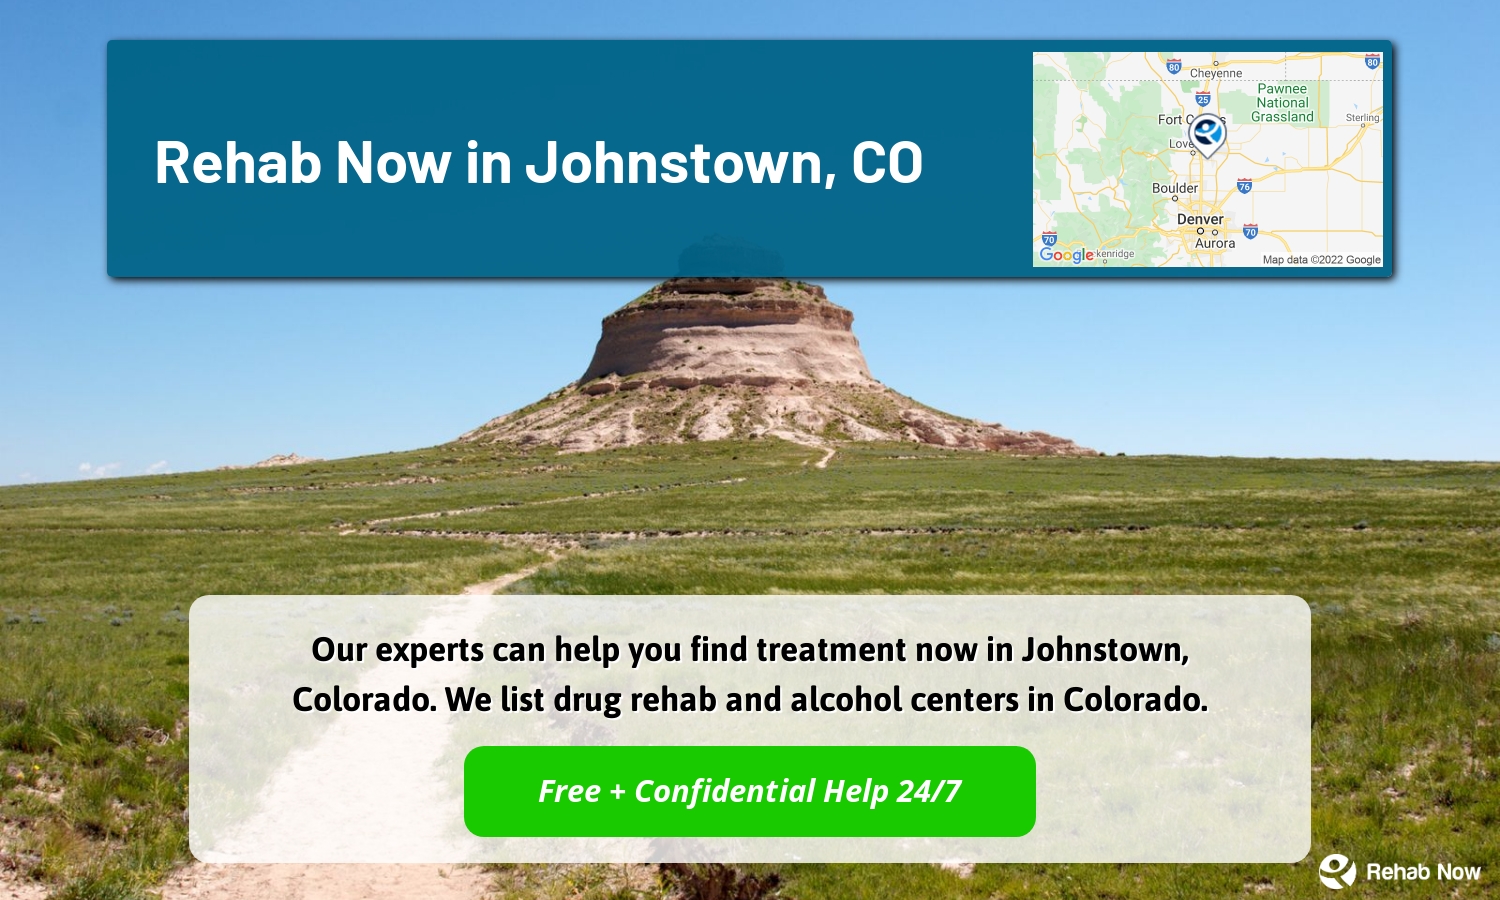 Our experts can help you find treatment now in Johnstown, Colorado. We list drug rehab and alcohol centers in Colorado.